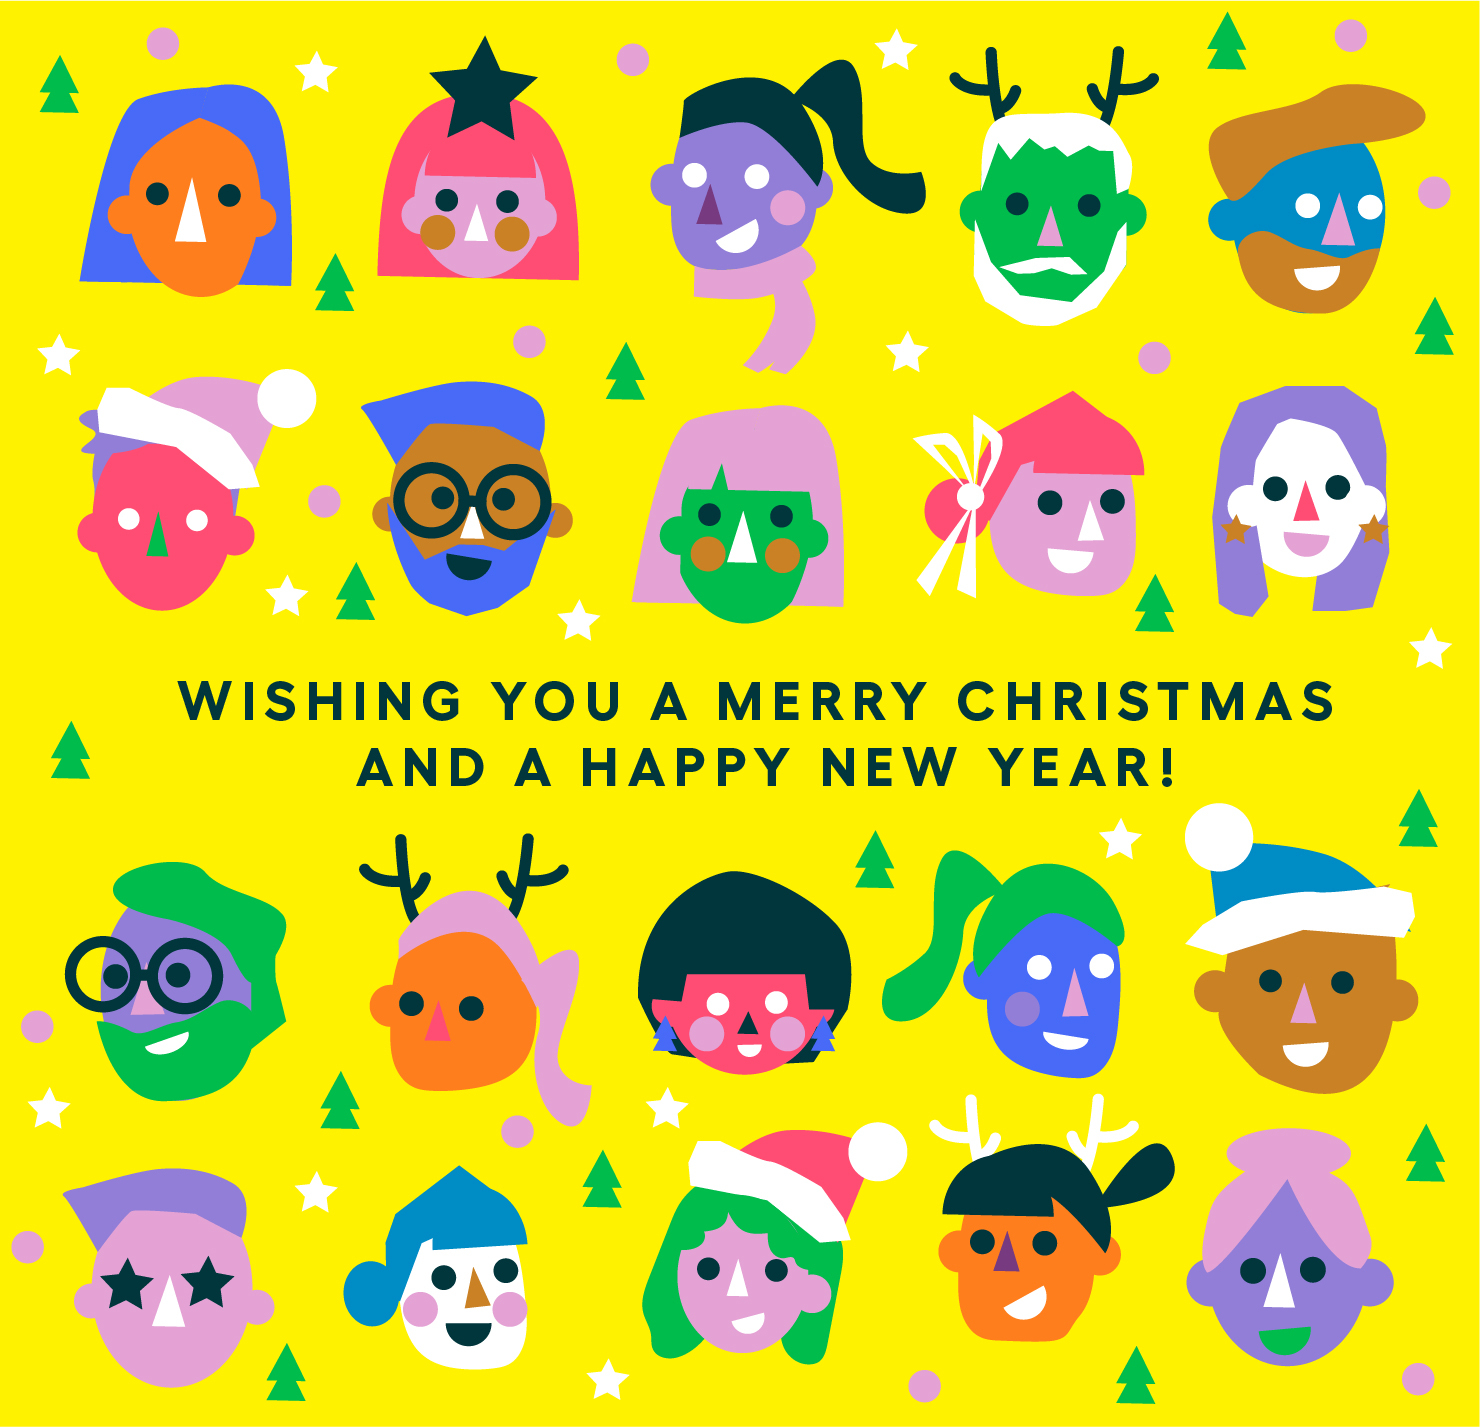 20 cartoon faces representing the employees of Anthologie. Text: Wishing you a merry Christmas and a happy new year!